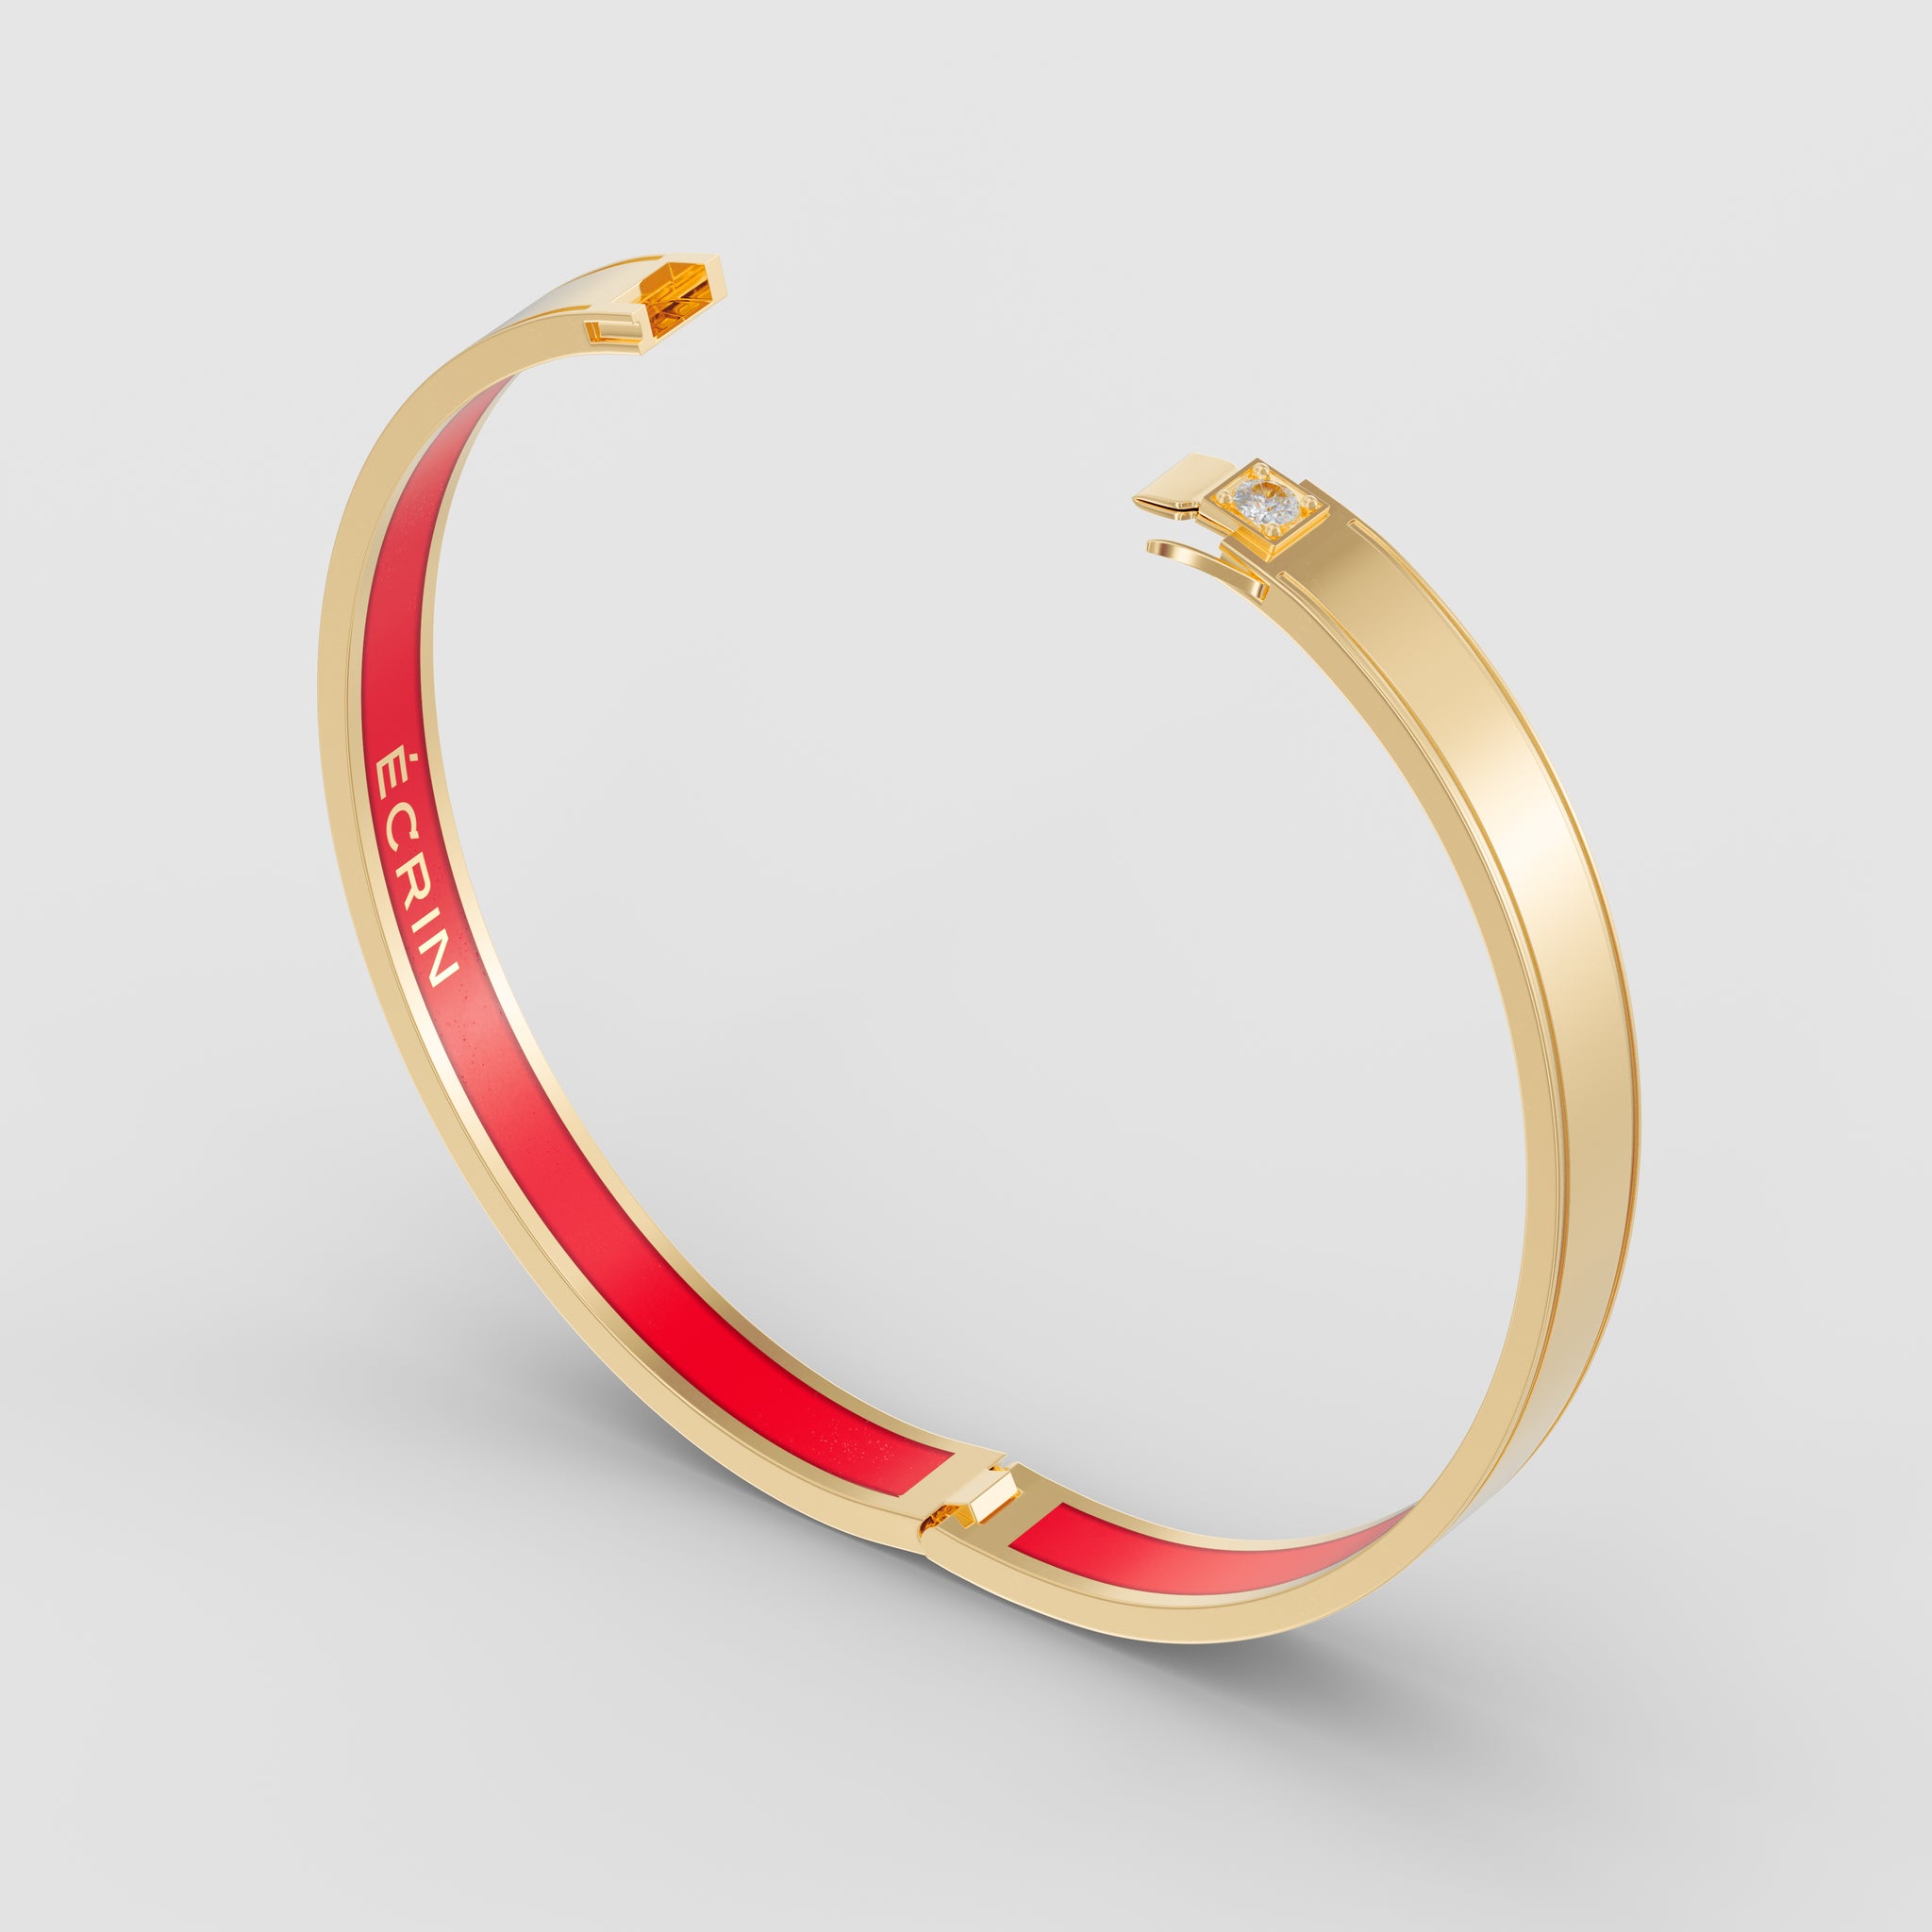 The Cicret Bracelet Projects an Interactive Touchscreen Display on the  Wearer's Forearm